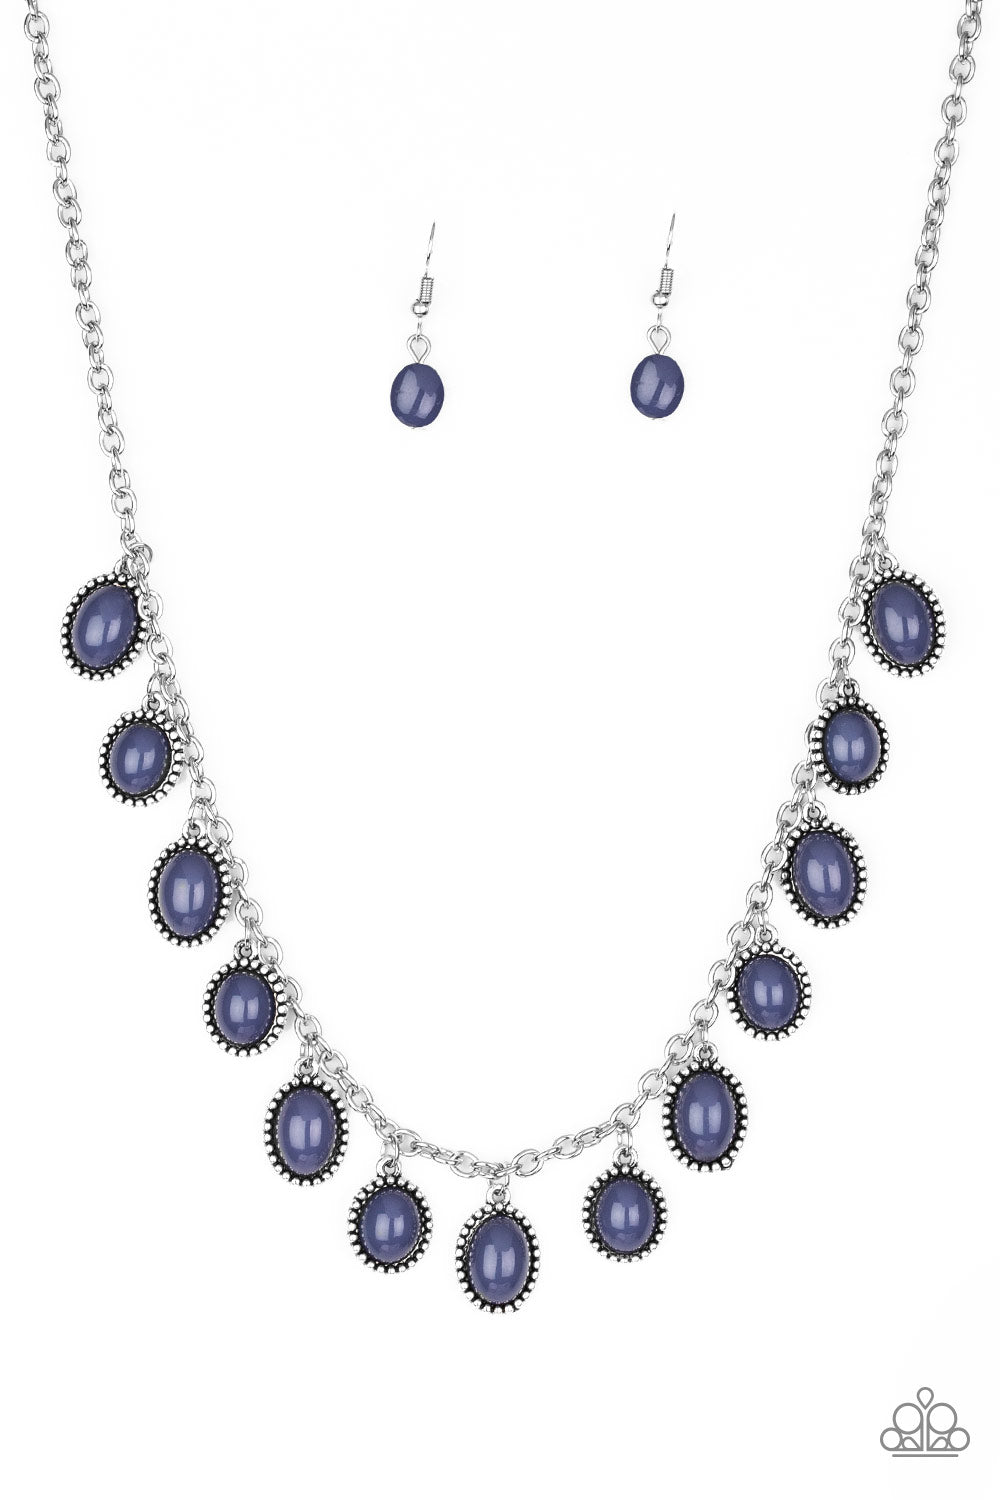 Make Some Roam - Blue and Silver Fashion Necklace - Paparazzi Accessories Infused with studded silver frames, round and oval Sargasso Sea beads swing from a shimmery silver chain, creating a refreshing fringe below the collar. Features an adjustable clasp closure. Sold as one individual necklace.